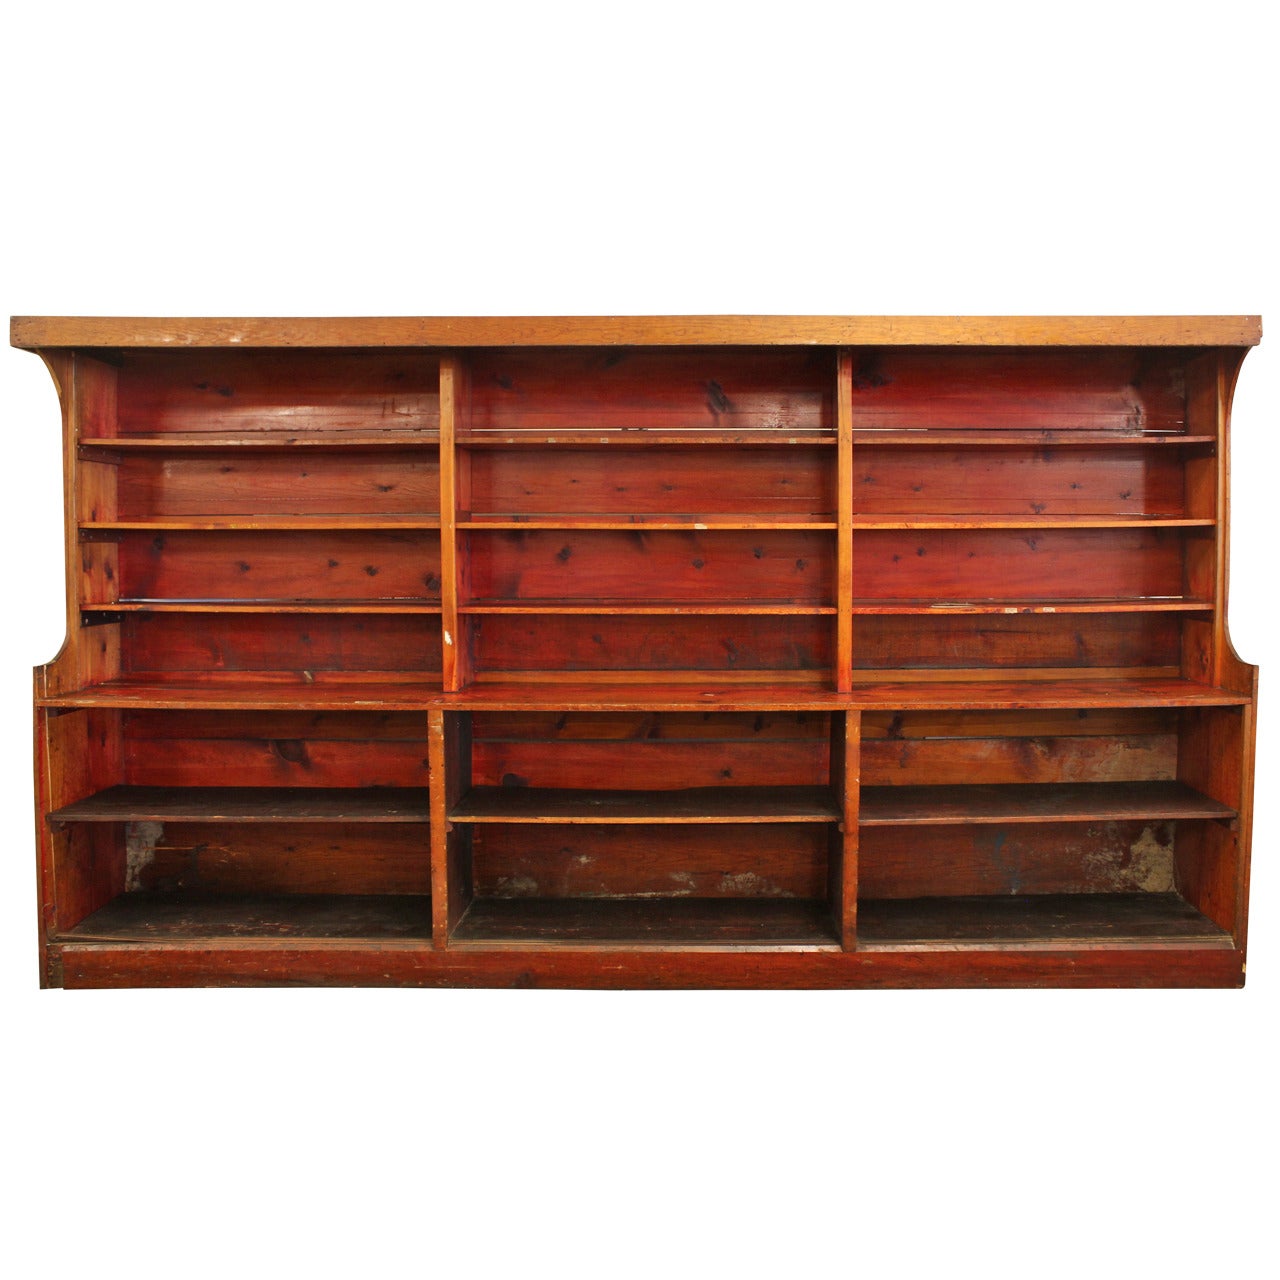 Antique American Department Store Shelves For Sale